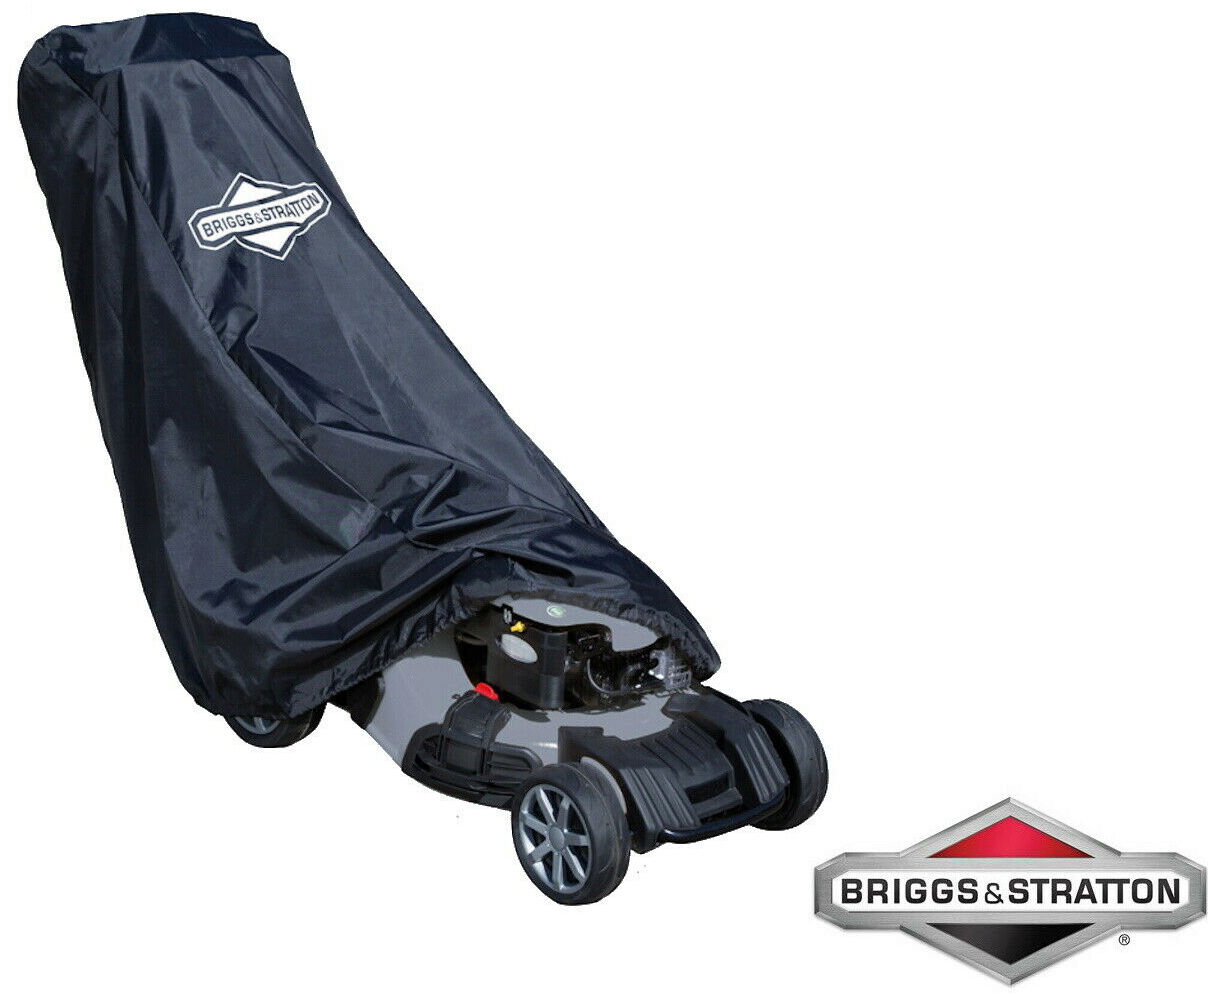 Briggs and Stratton Universal Lawnmower Cover - up to 55cm  992424